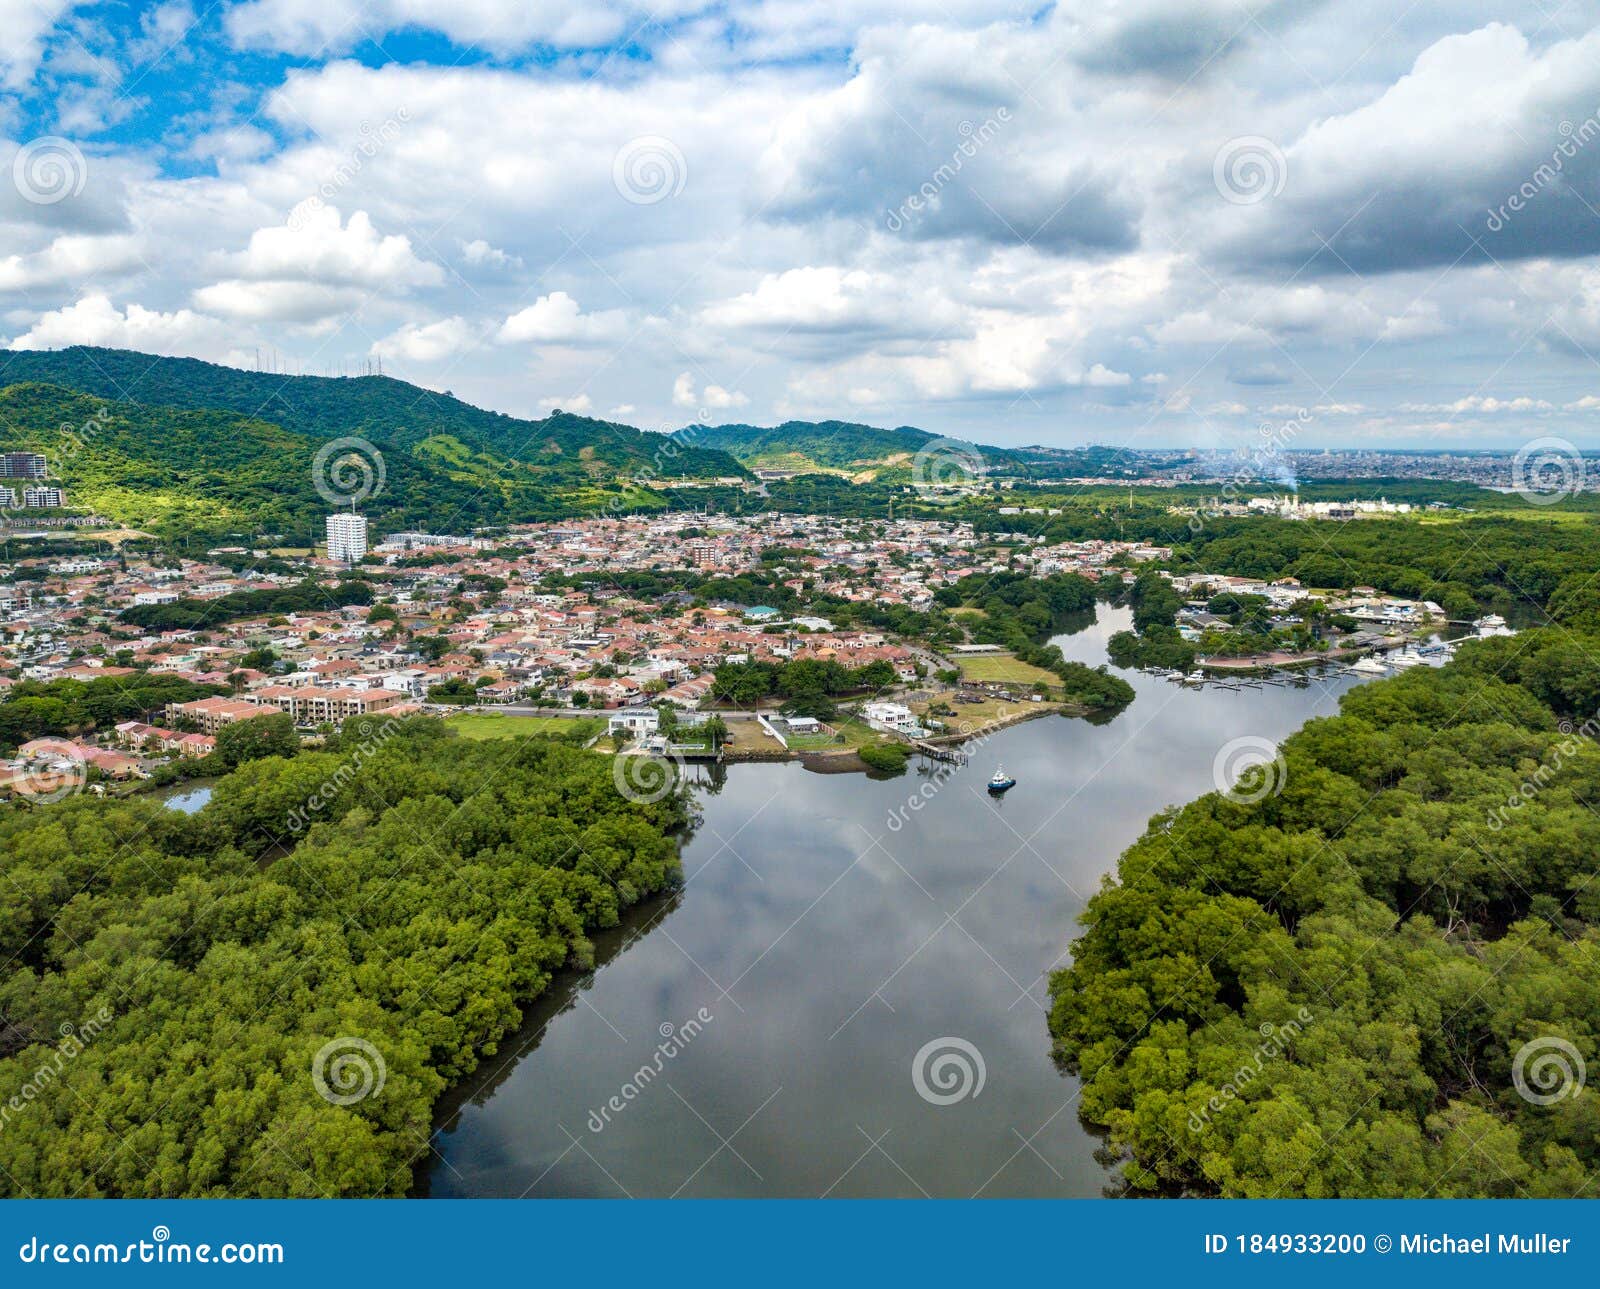 aerial drone shot of river, heavy density mangrove and gated community